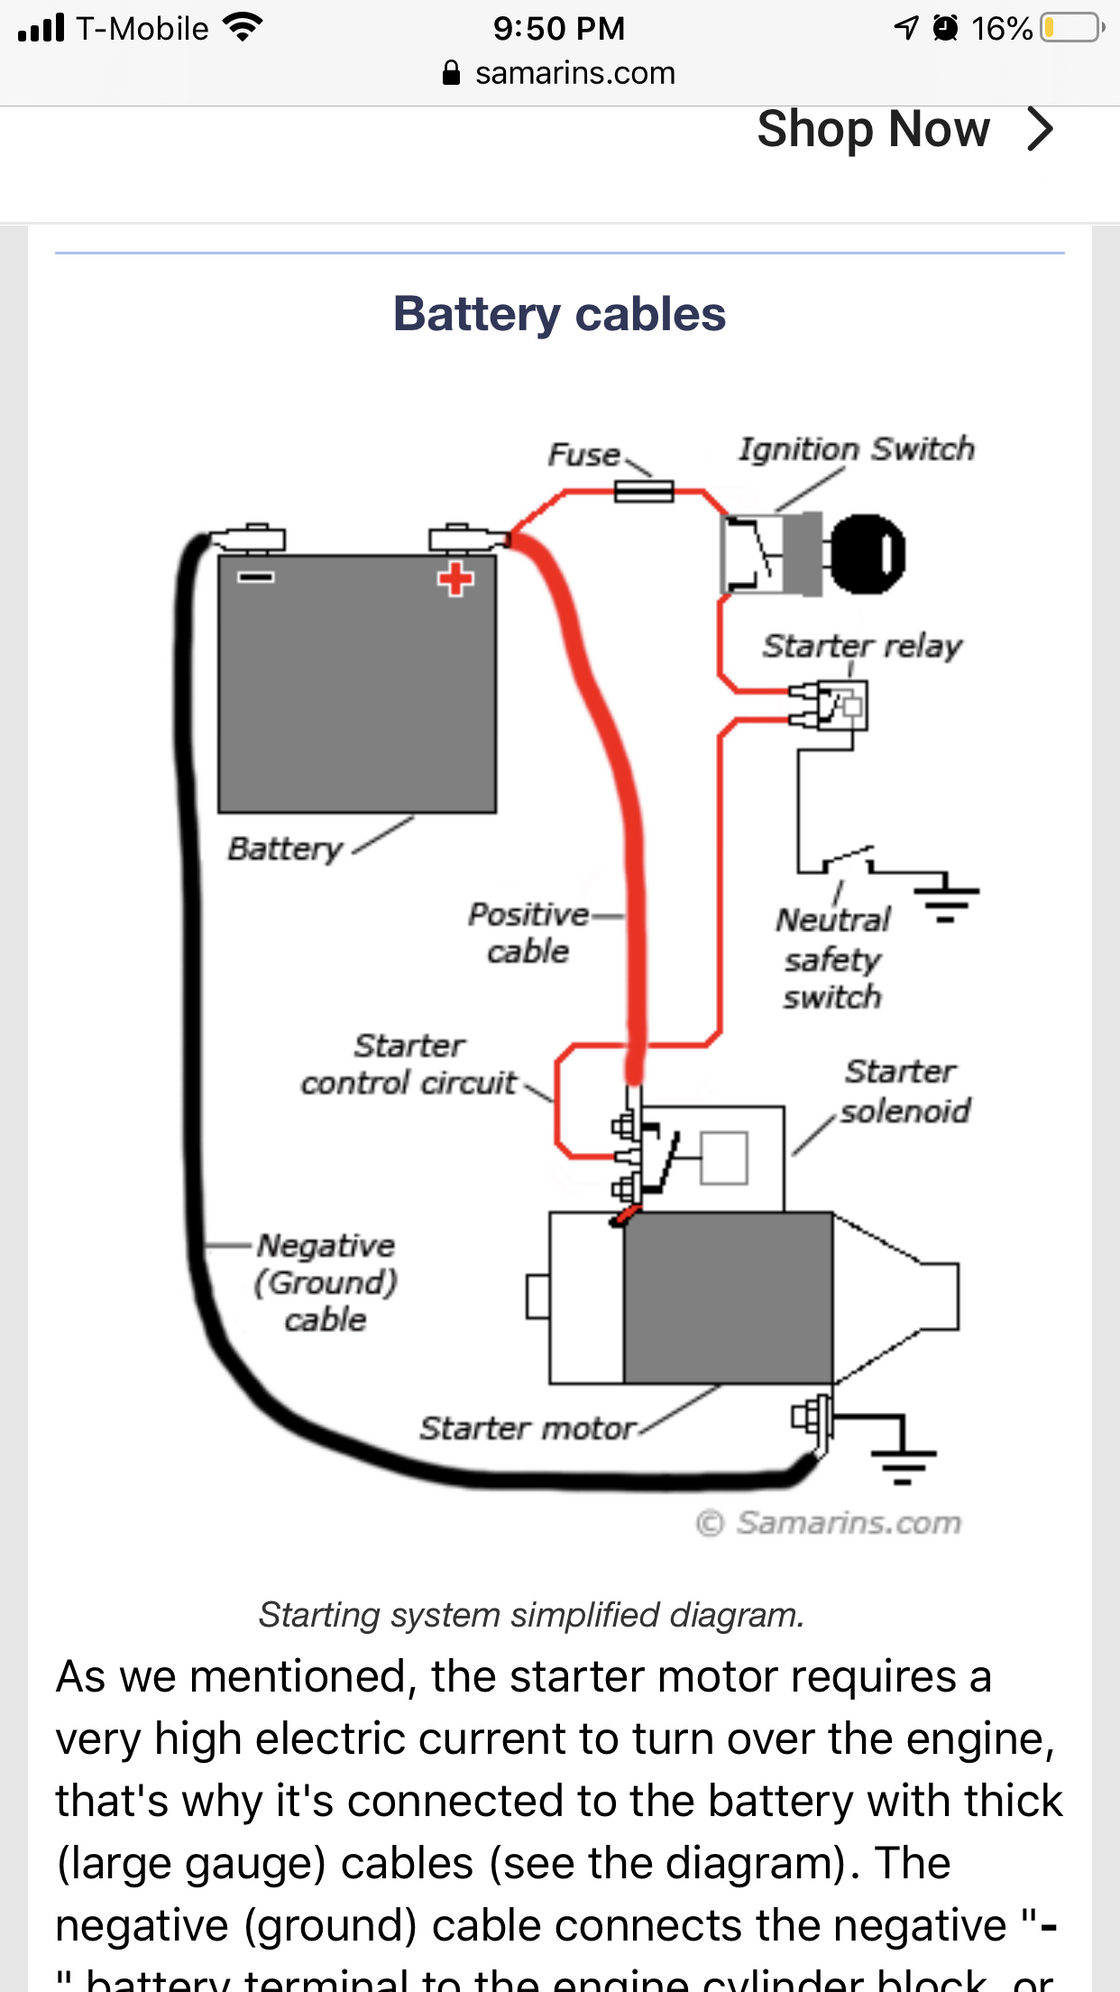 Starter Relay Re-Wire or Retrofit for 95 and earlier Trucks / 4Runner -  YotaTech Forums 8 Pin CDI Wiring Diagram YotaTech